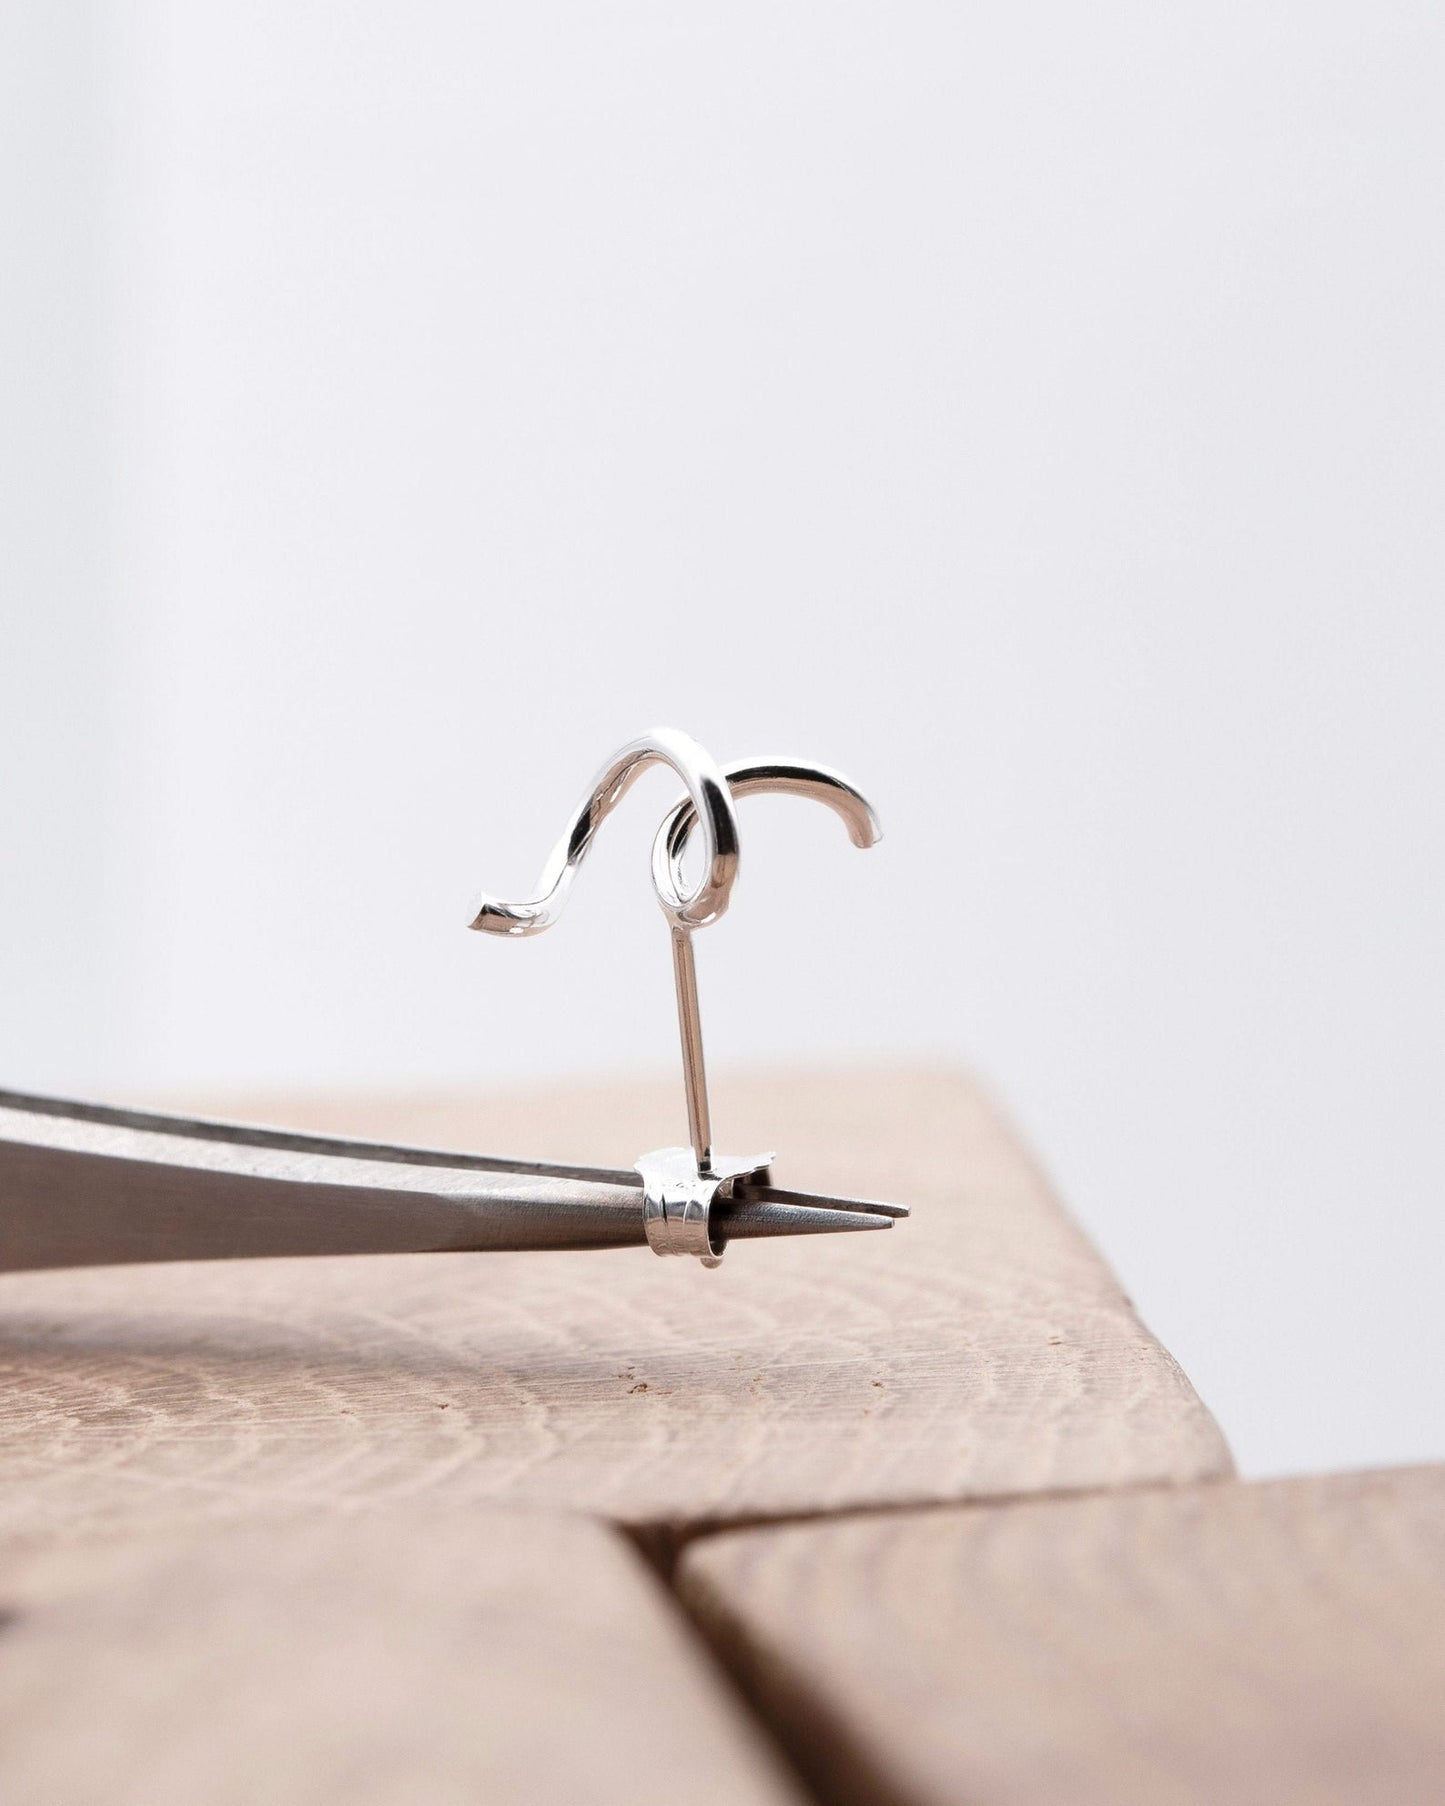 The abstract single earring is twisted by hand  from silver by AgJc